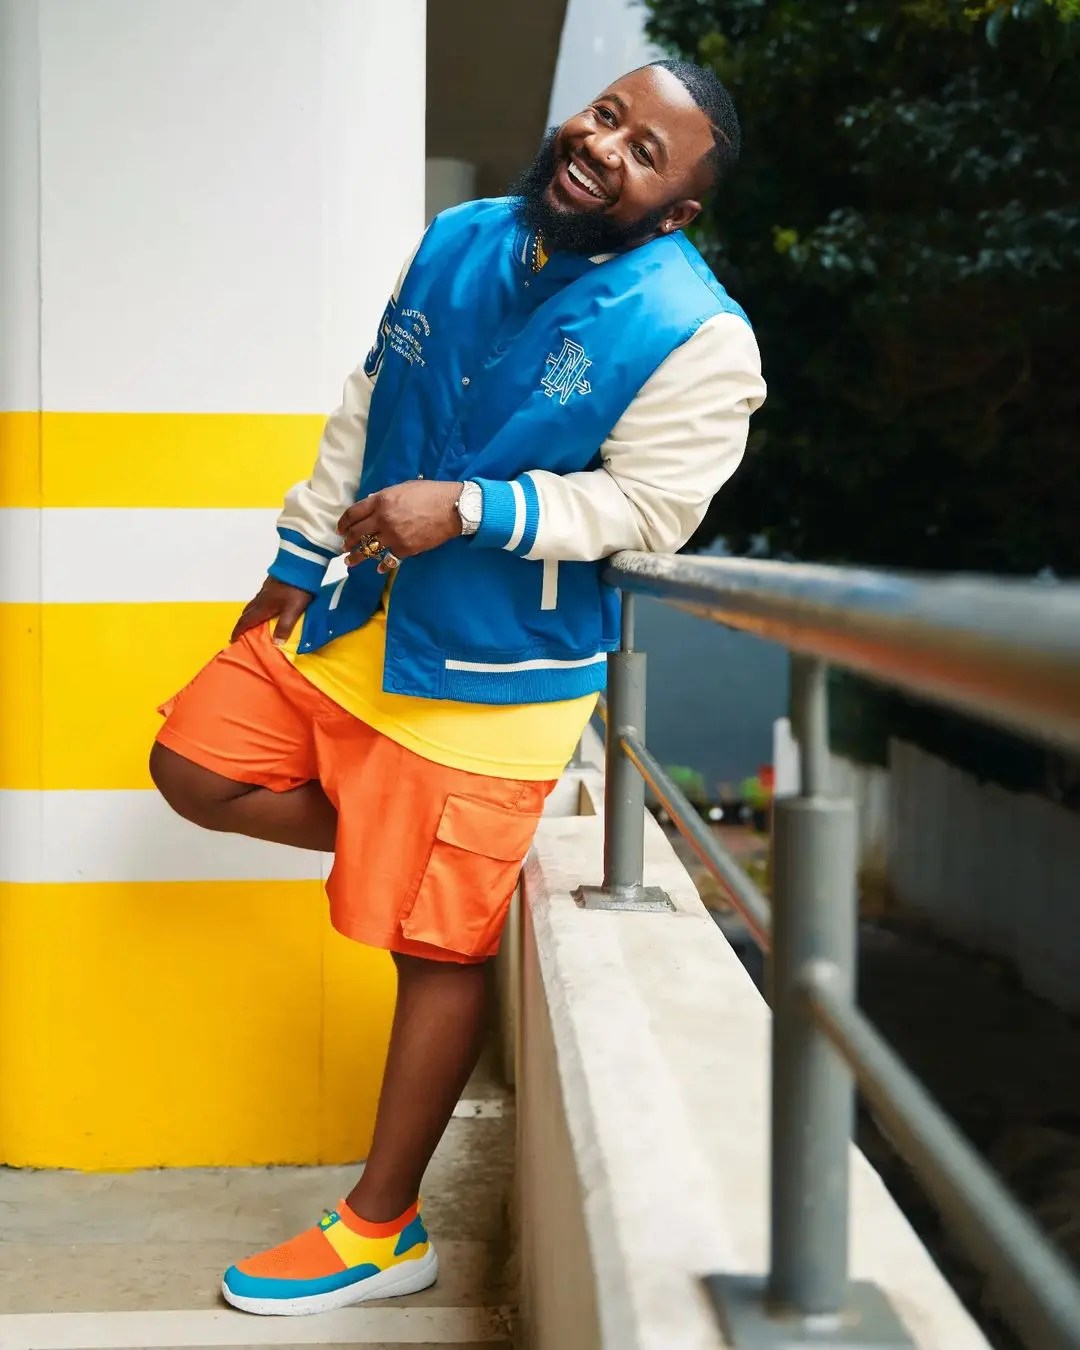 Cassper Nyovest talks about being the first rapper to win SAFTA